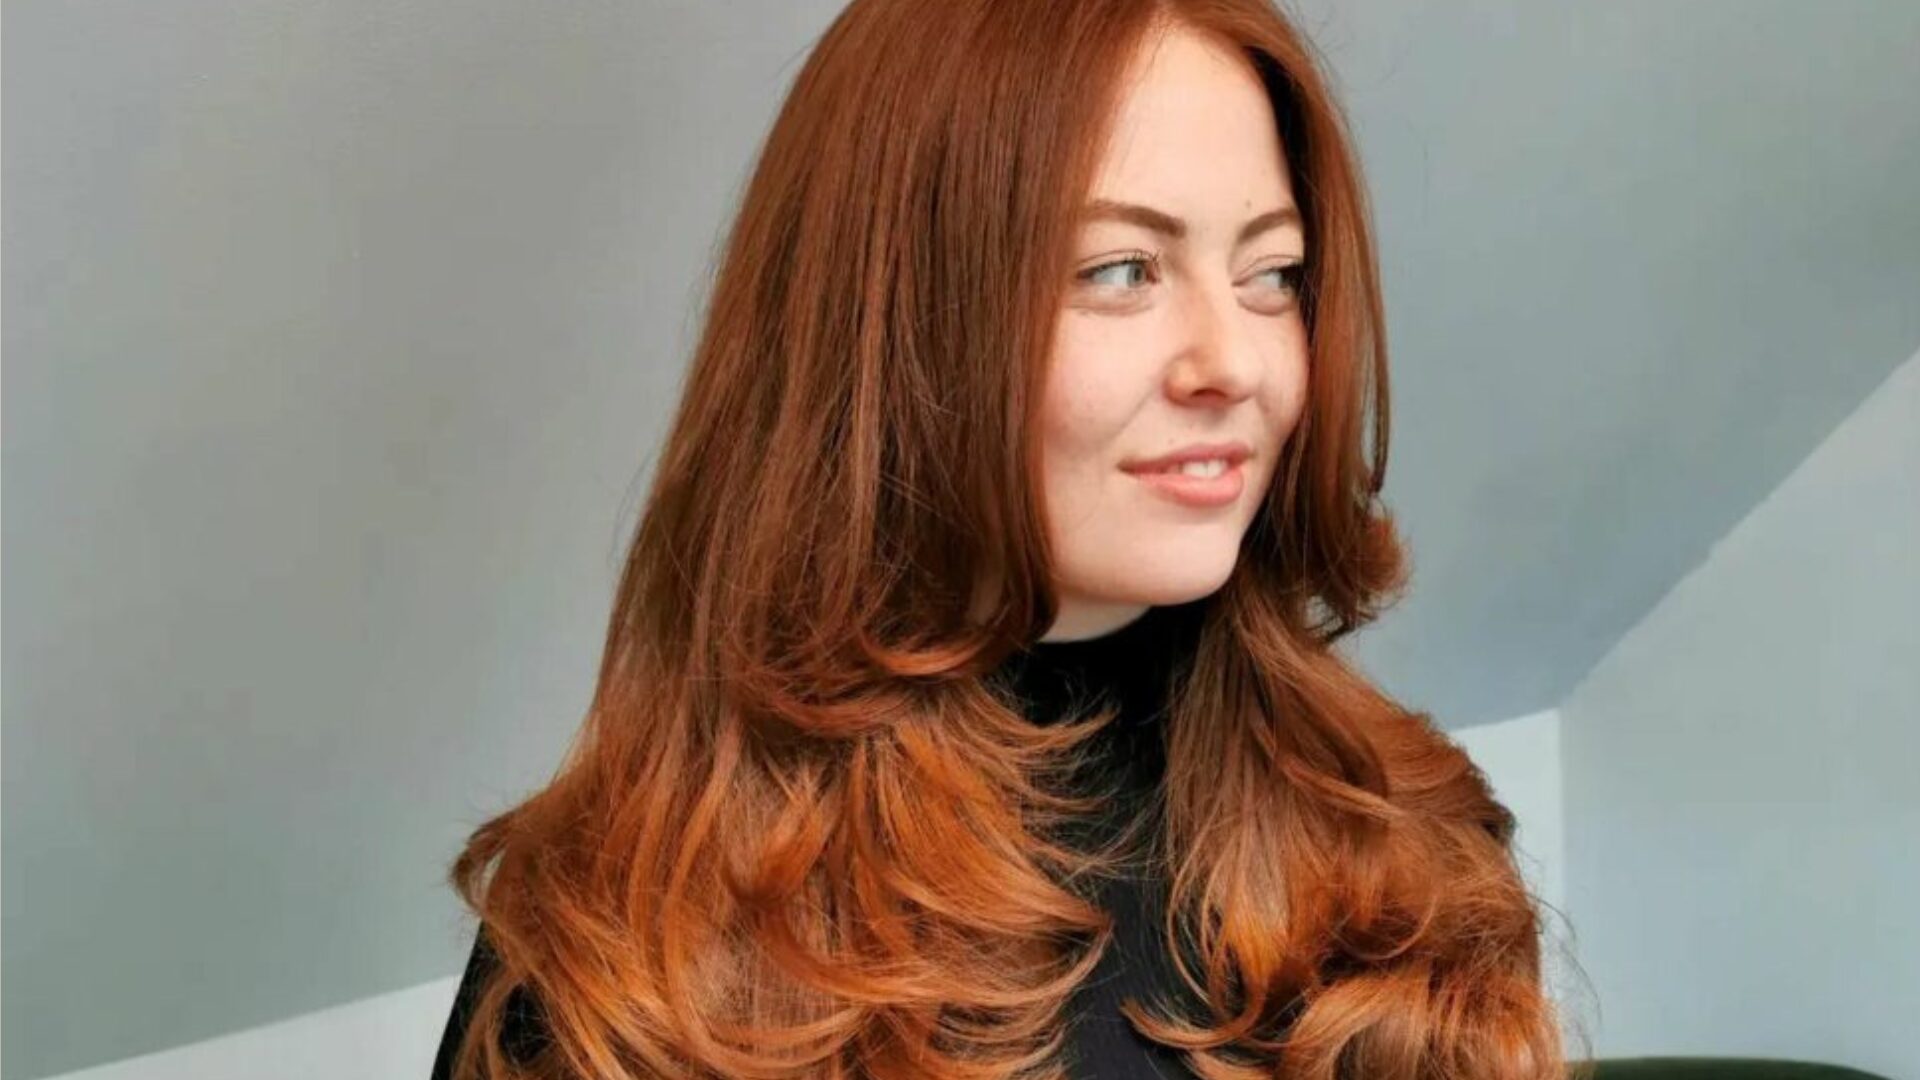 Trending Haircut for Redheads: Allow Us To Introduce You To ‘The Butterfly’